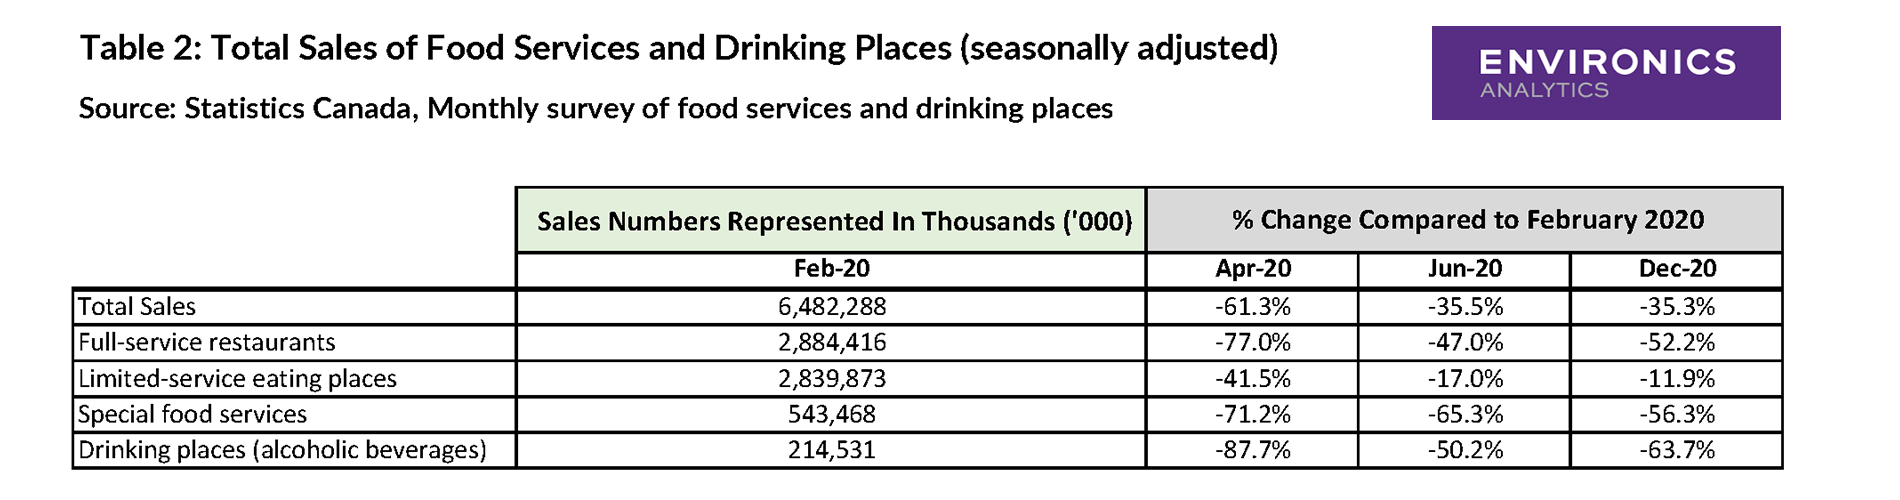 Table 2 Total Sales of Food Services and Drinking Places